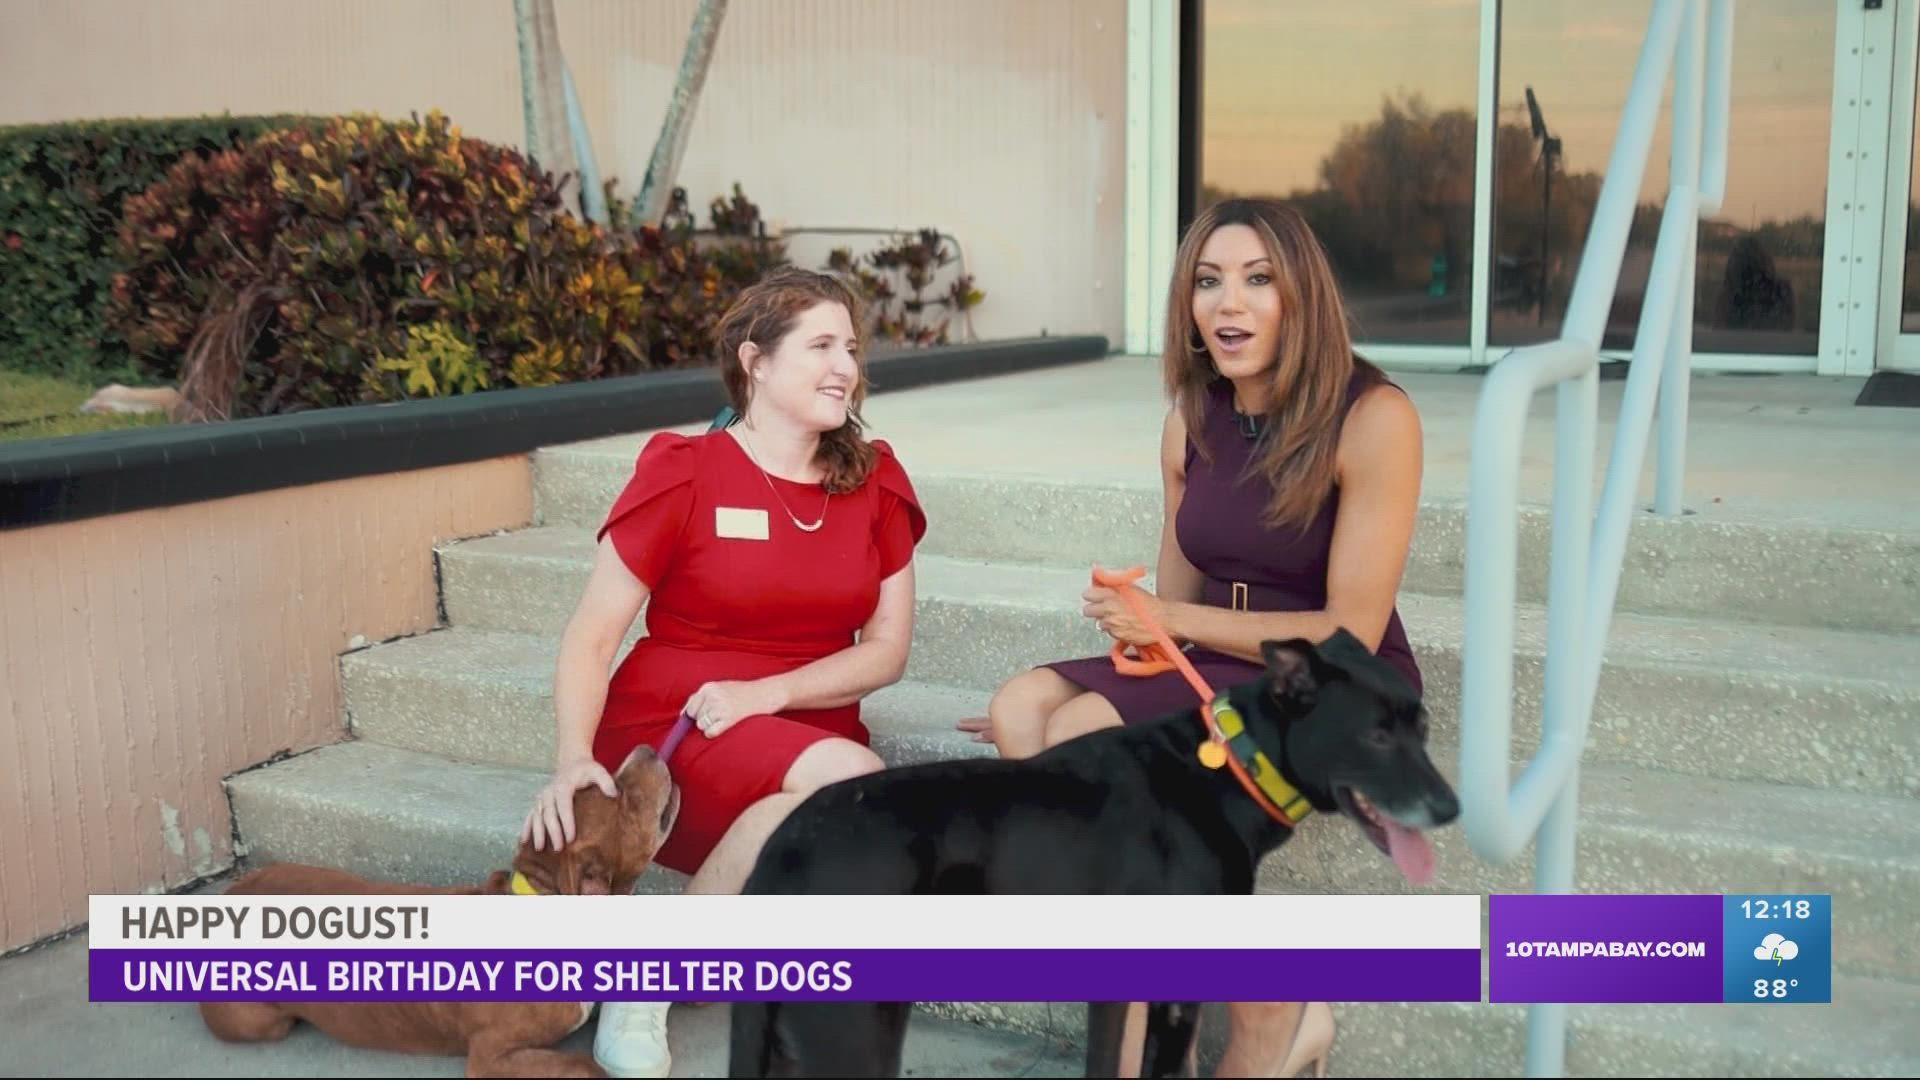 Programs through the Humane Society of Tampa Bay create a permanent bond between a dog and a person looking to adopt.